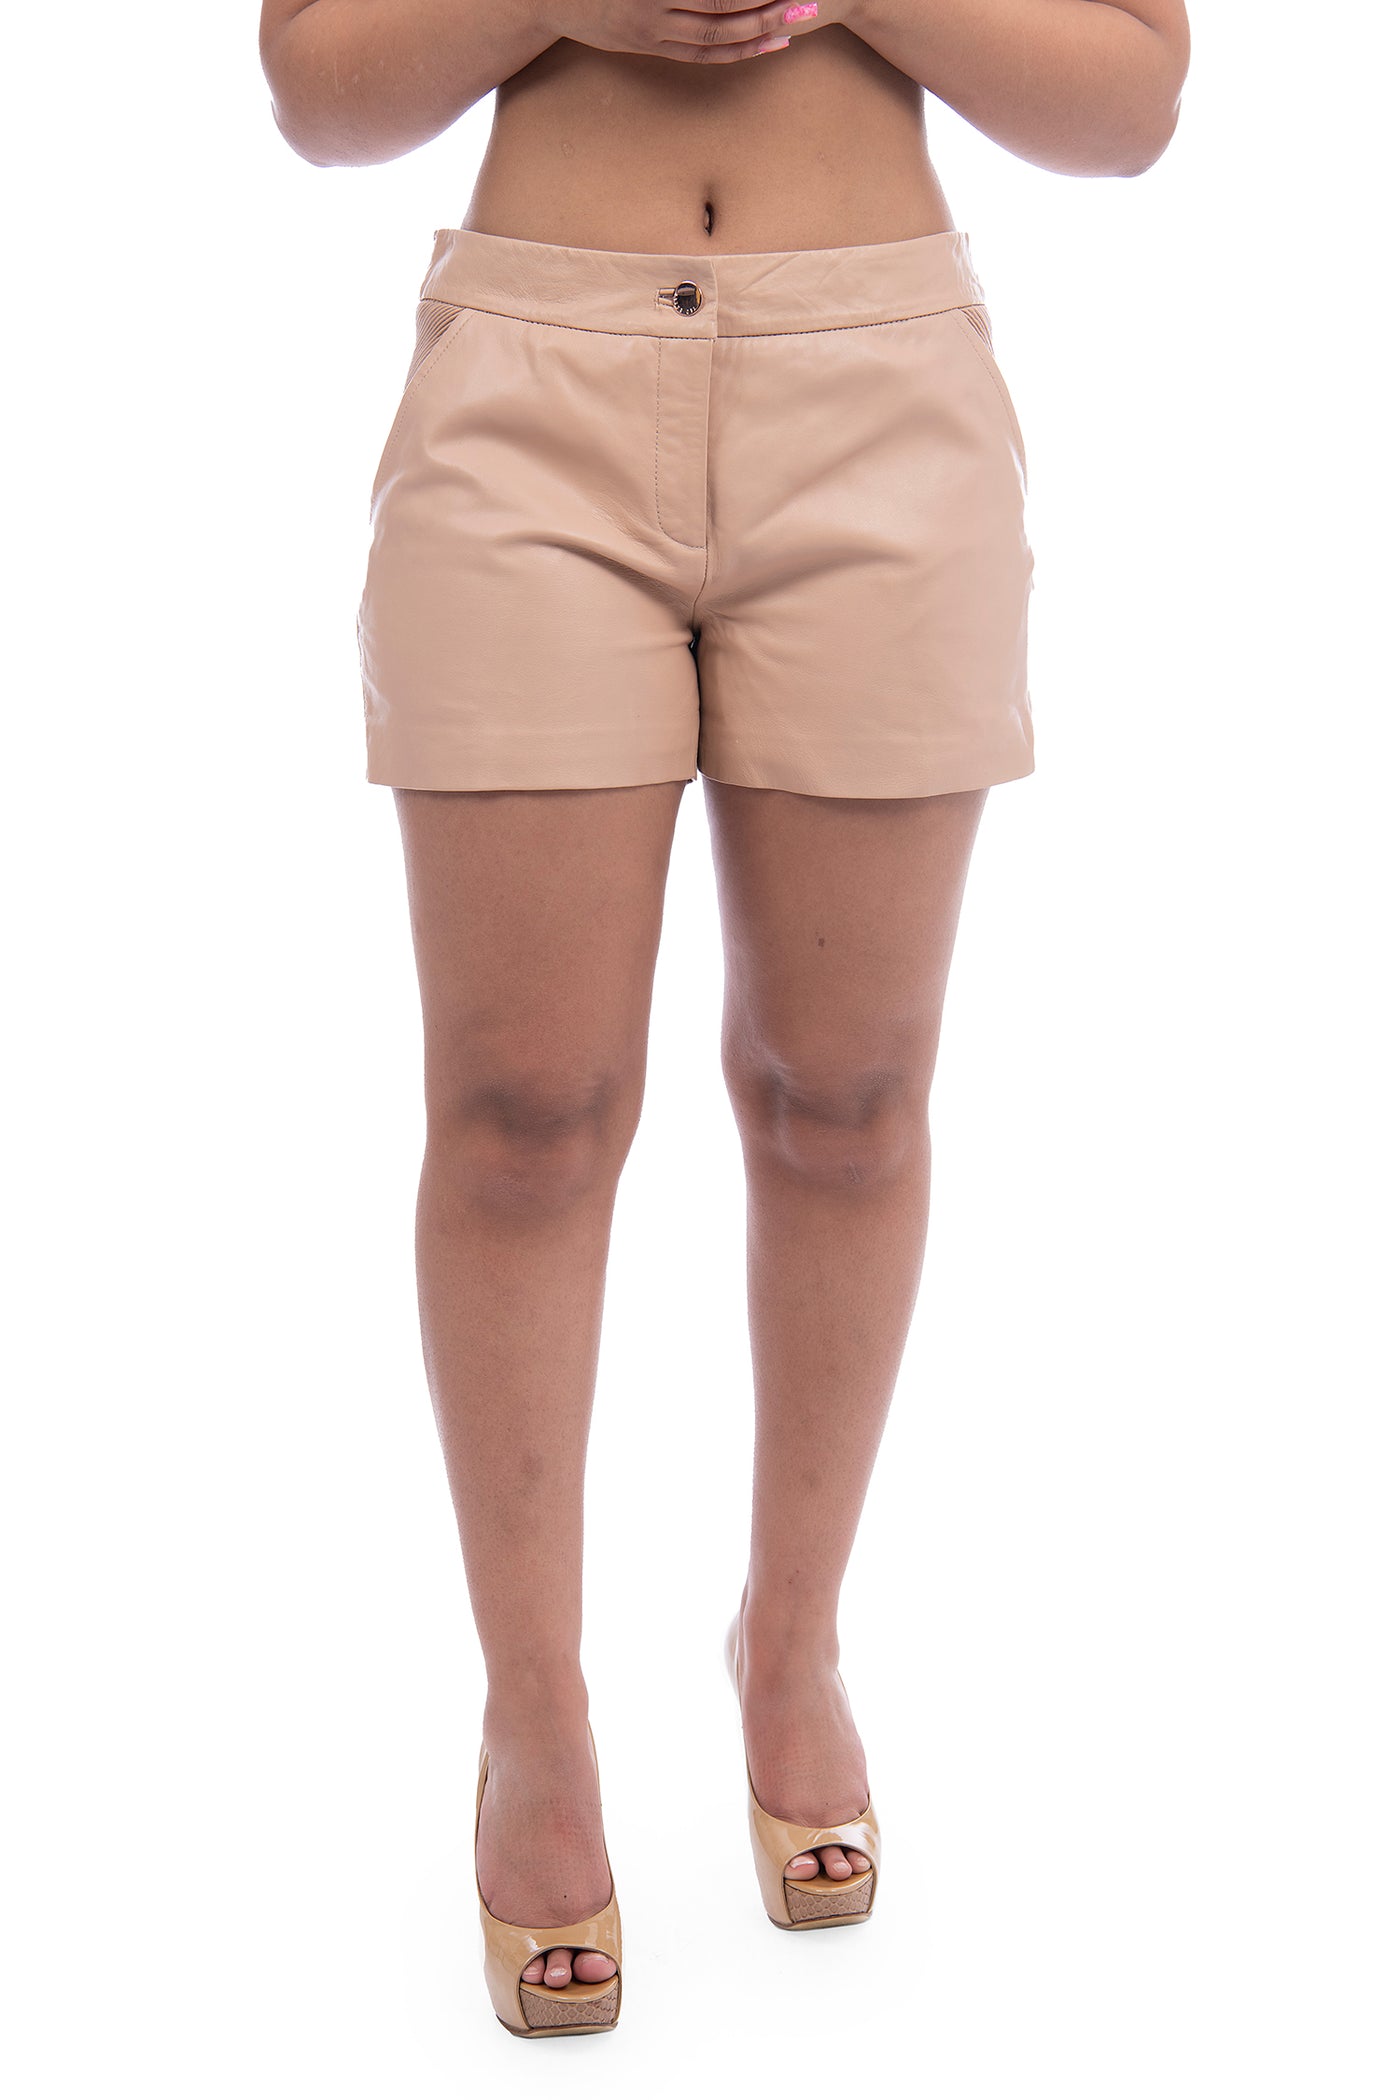 Ted Baker beige leather shorts, brand new